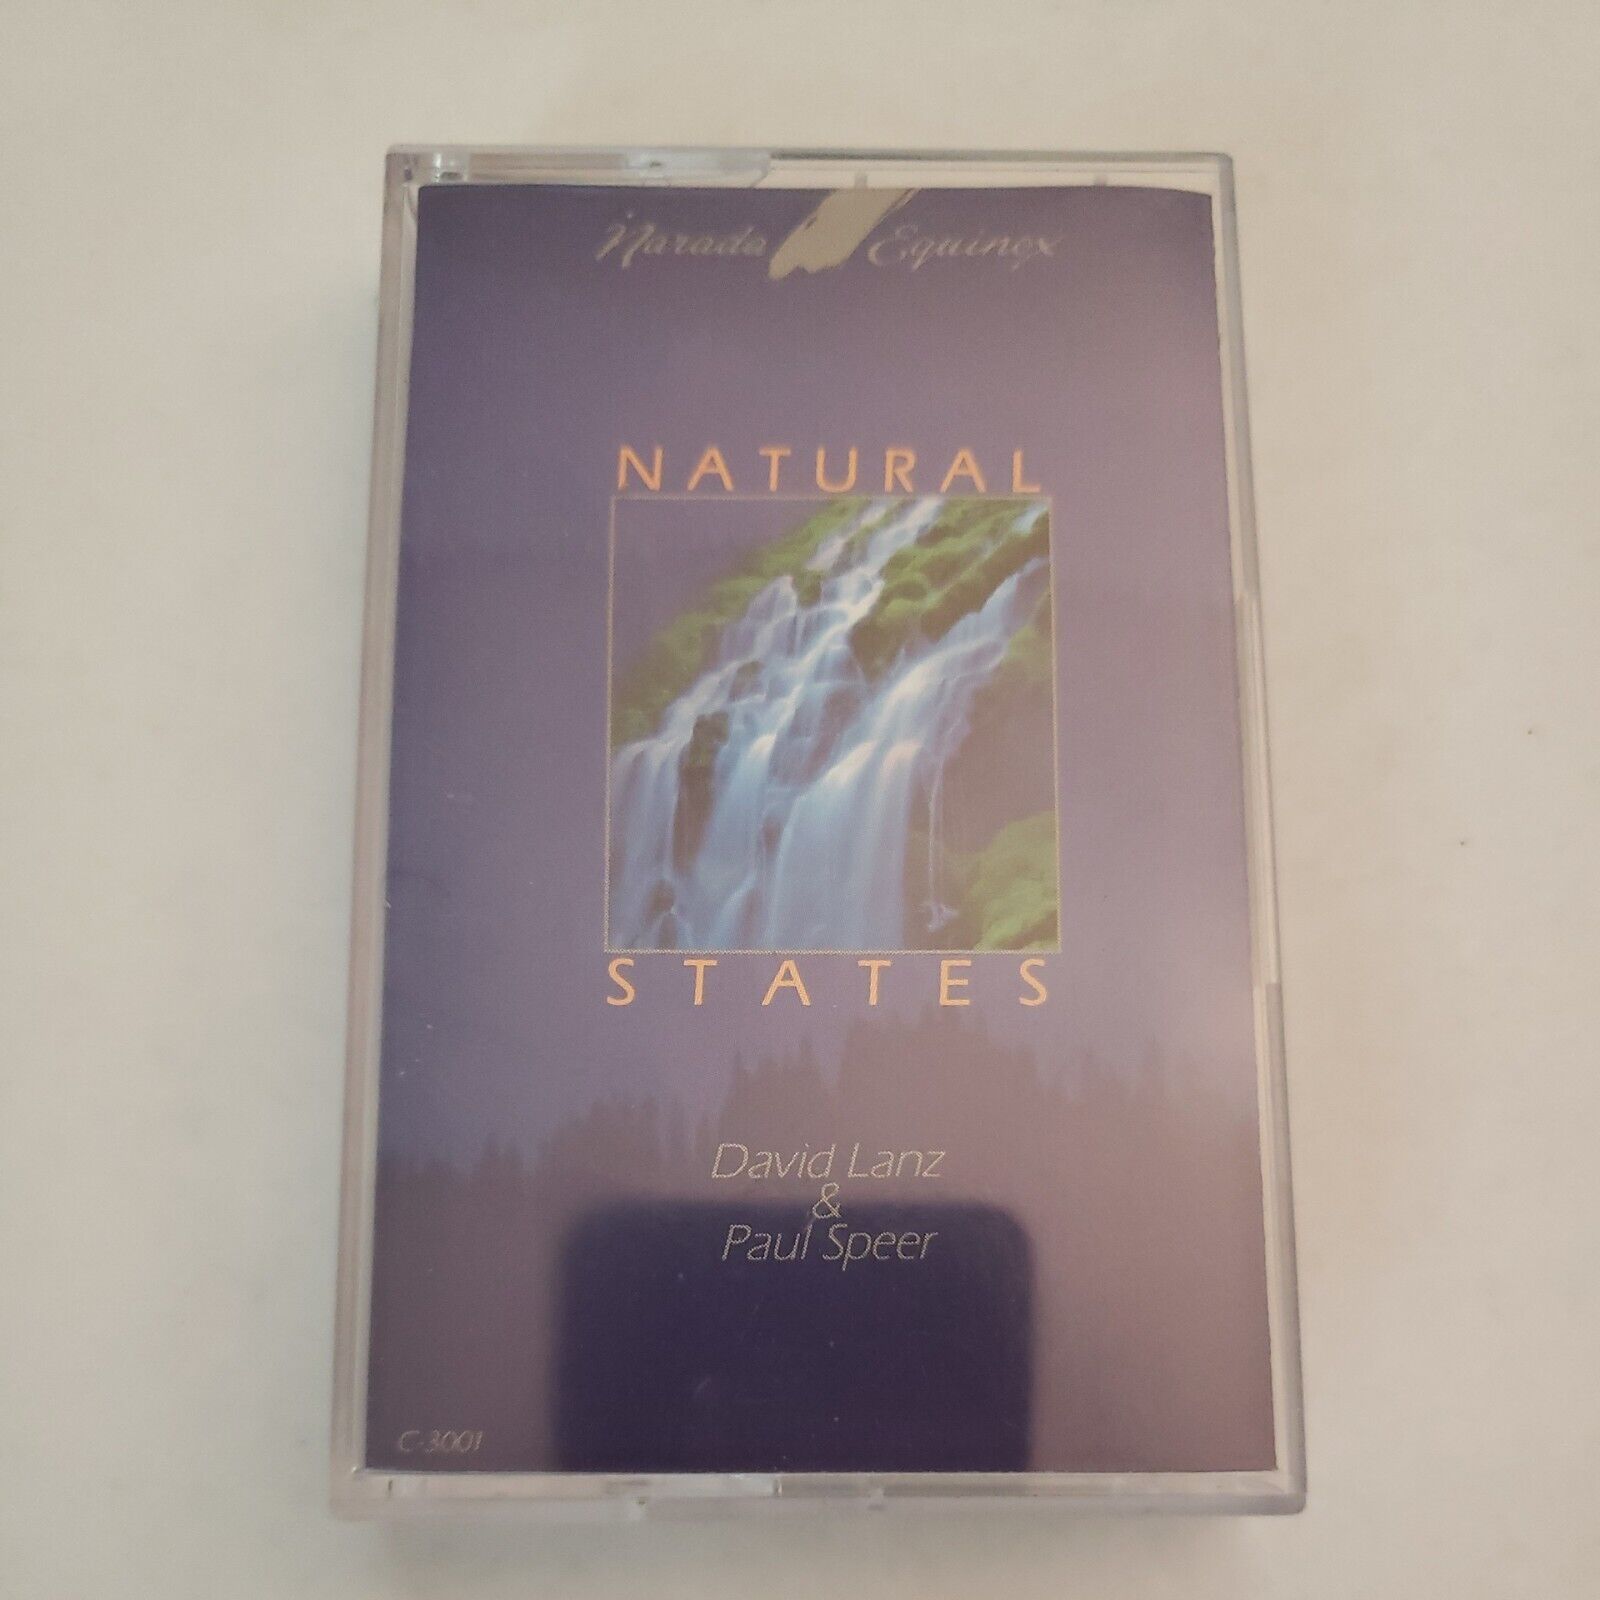 Perfect Tape Vintage 80s Natural States Cassette David Lane ambient nature music